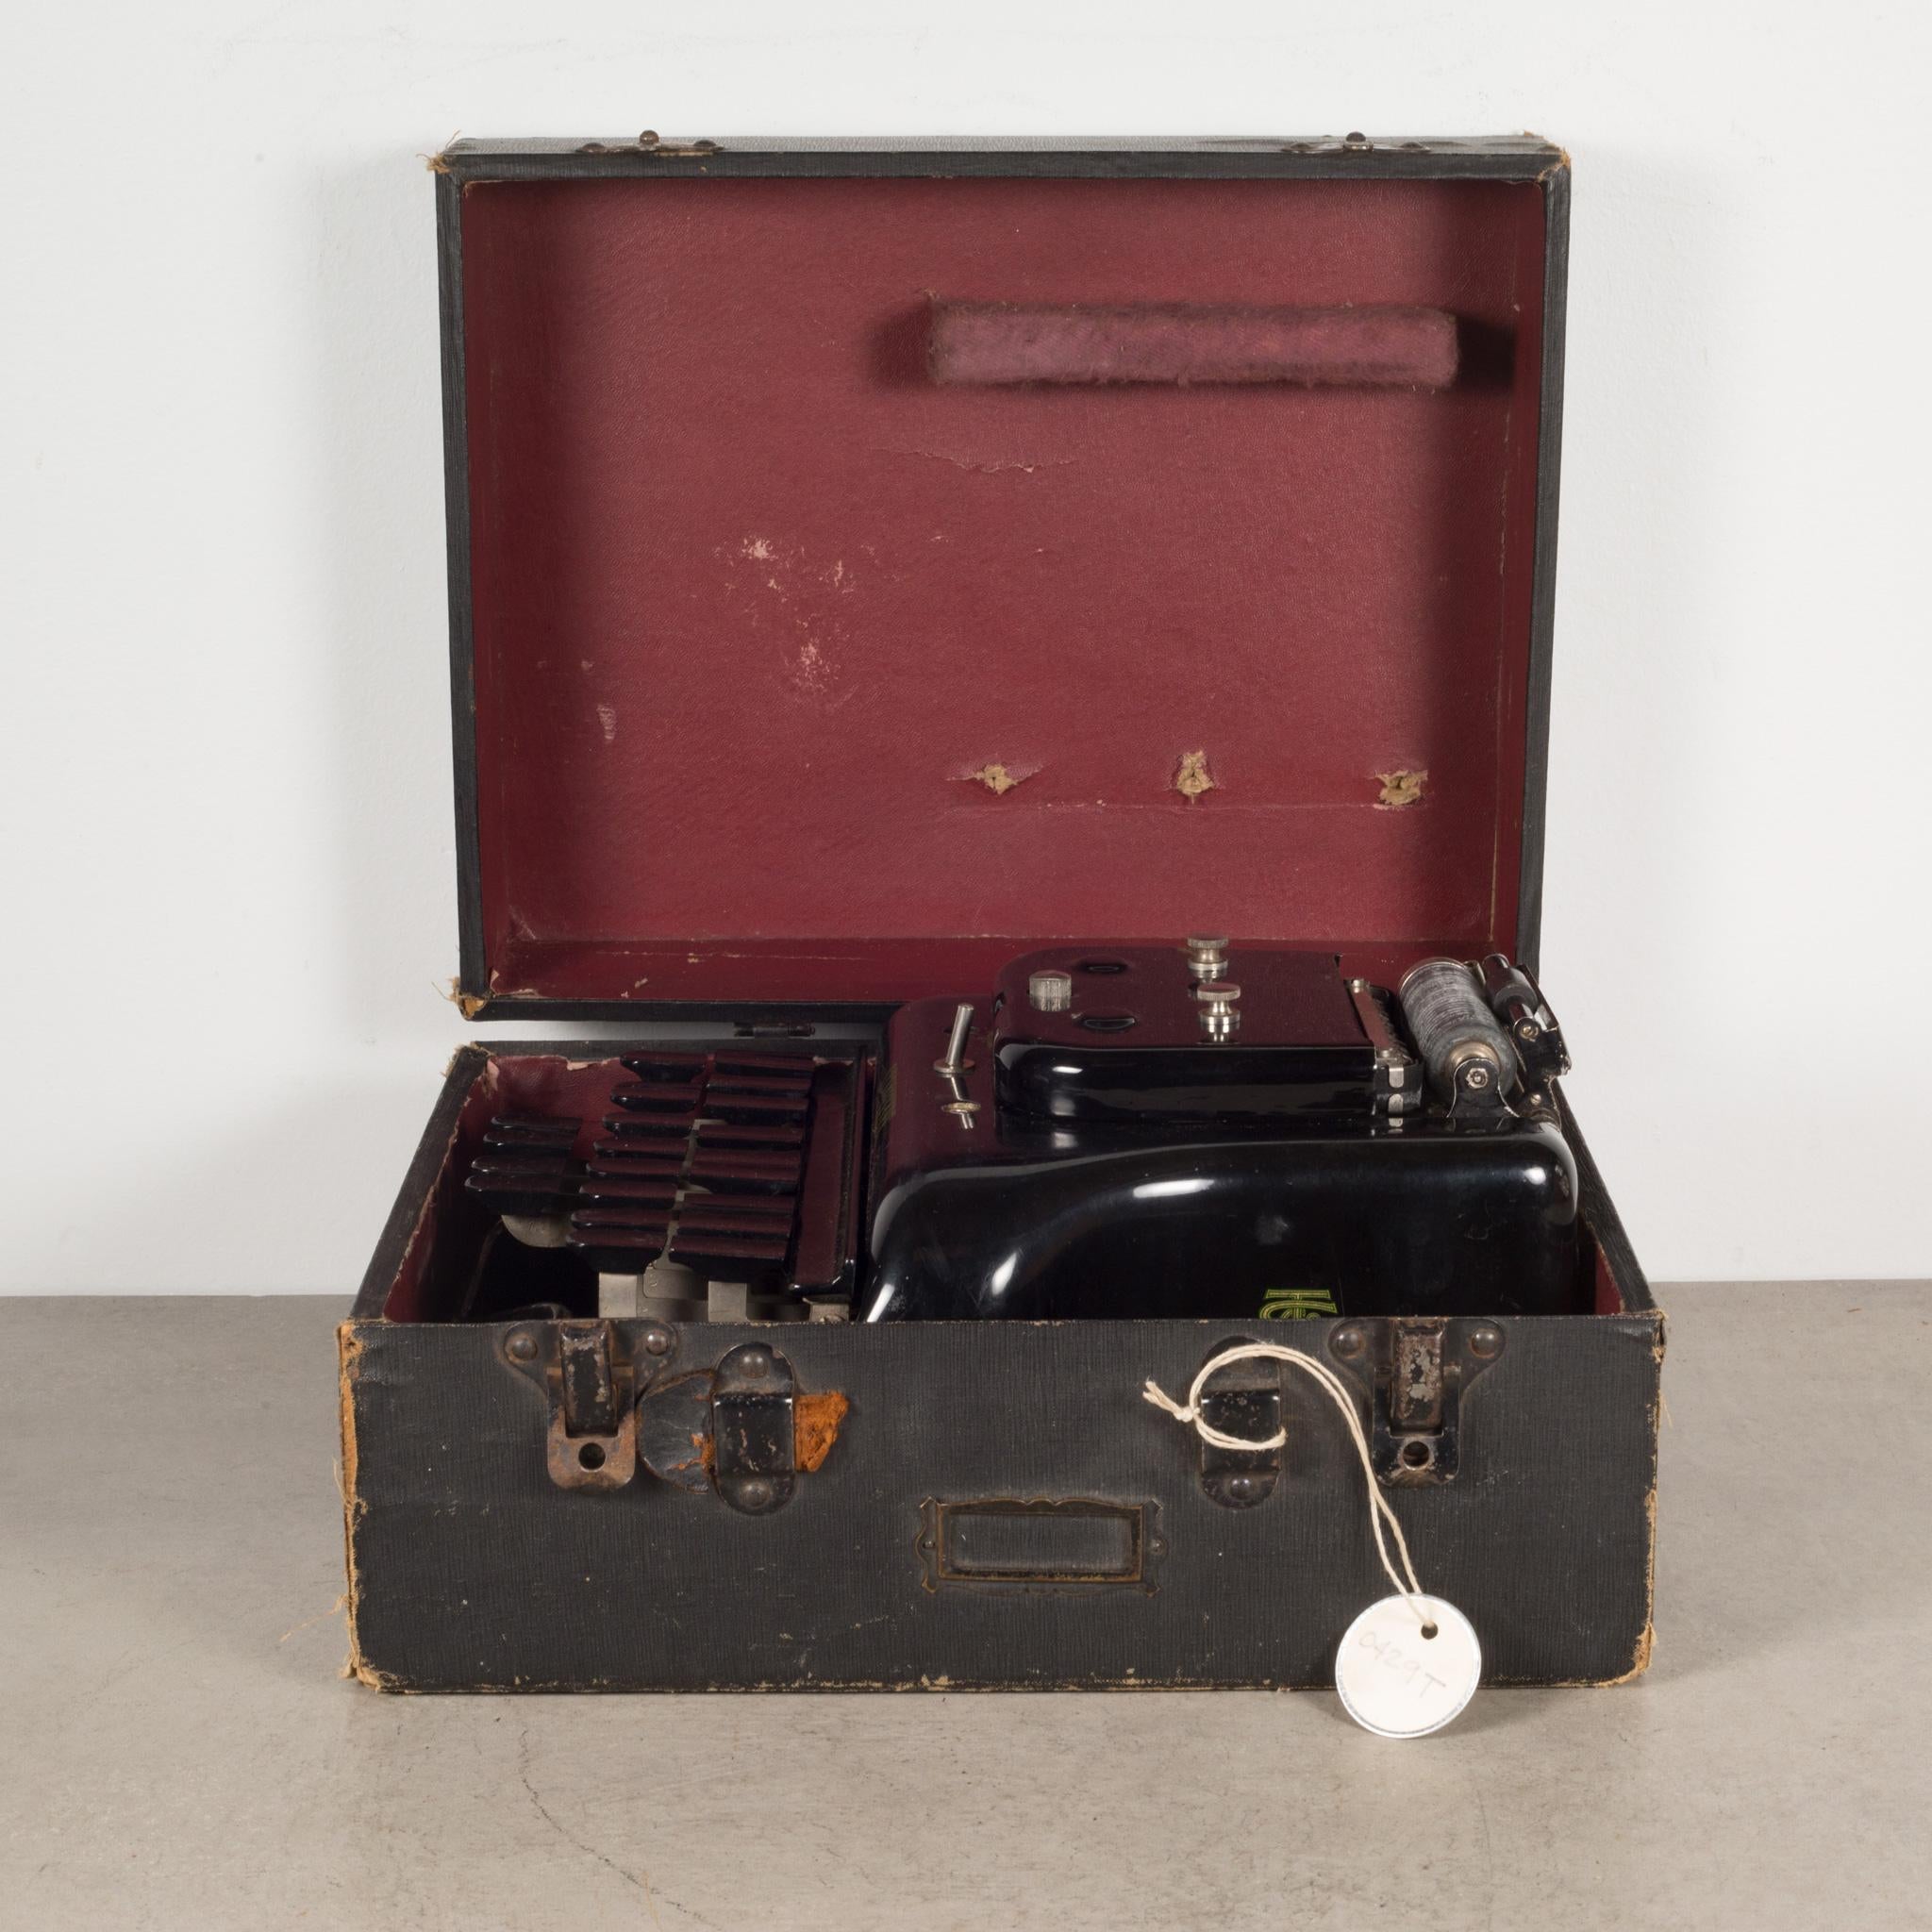 ABOUT

This is an original Stenotype stenograph with Bakelite body and original case. Leather handle on the case. All the keys work properly but doesn't seem to imprint on the paper.

 CREATOR Stenotype Company, Indianapolis, IN. 
 DATE OF